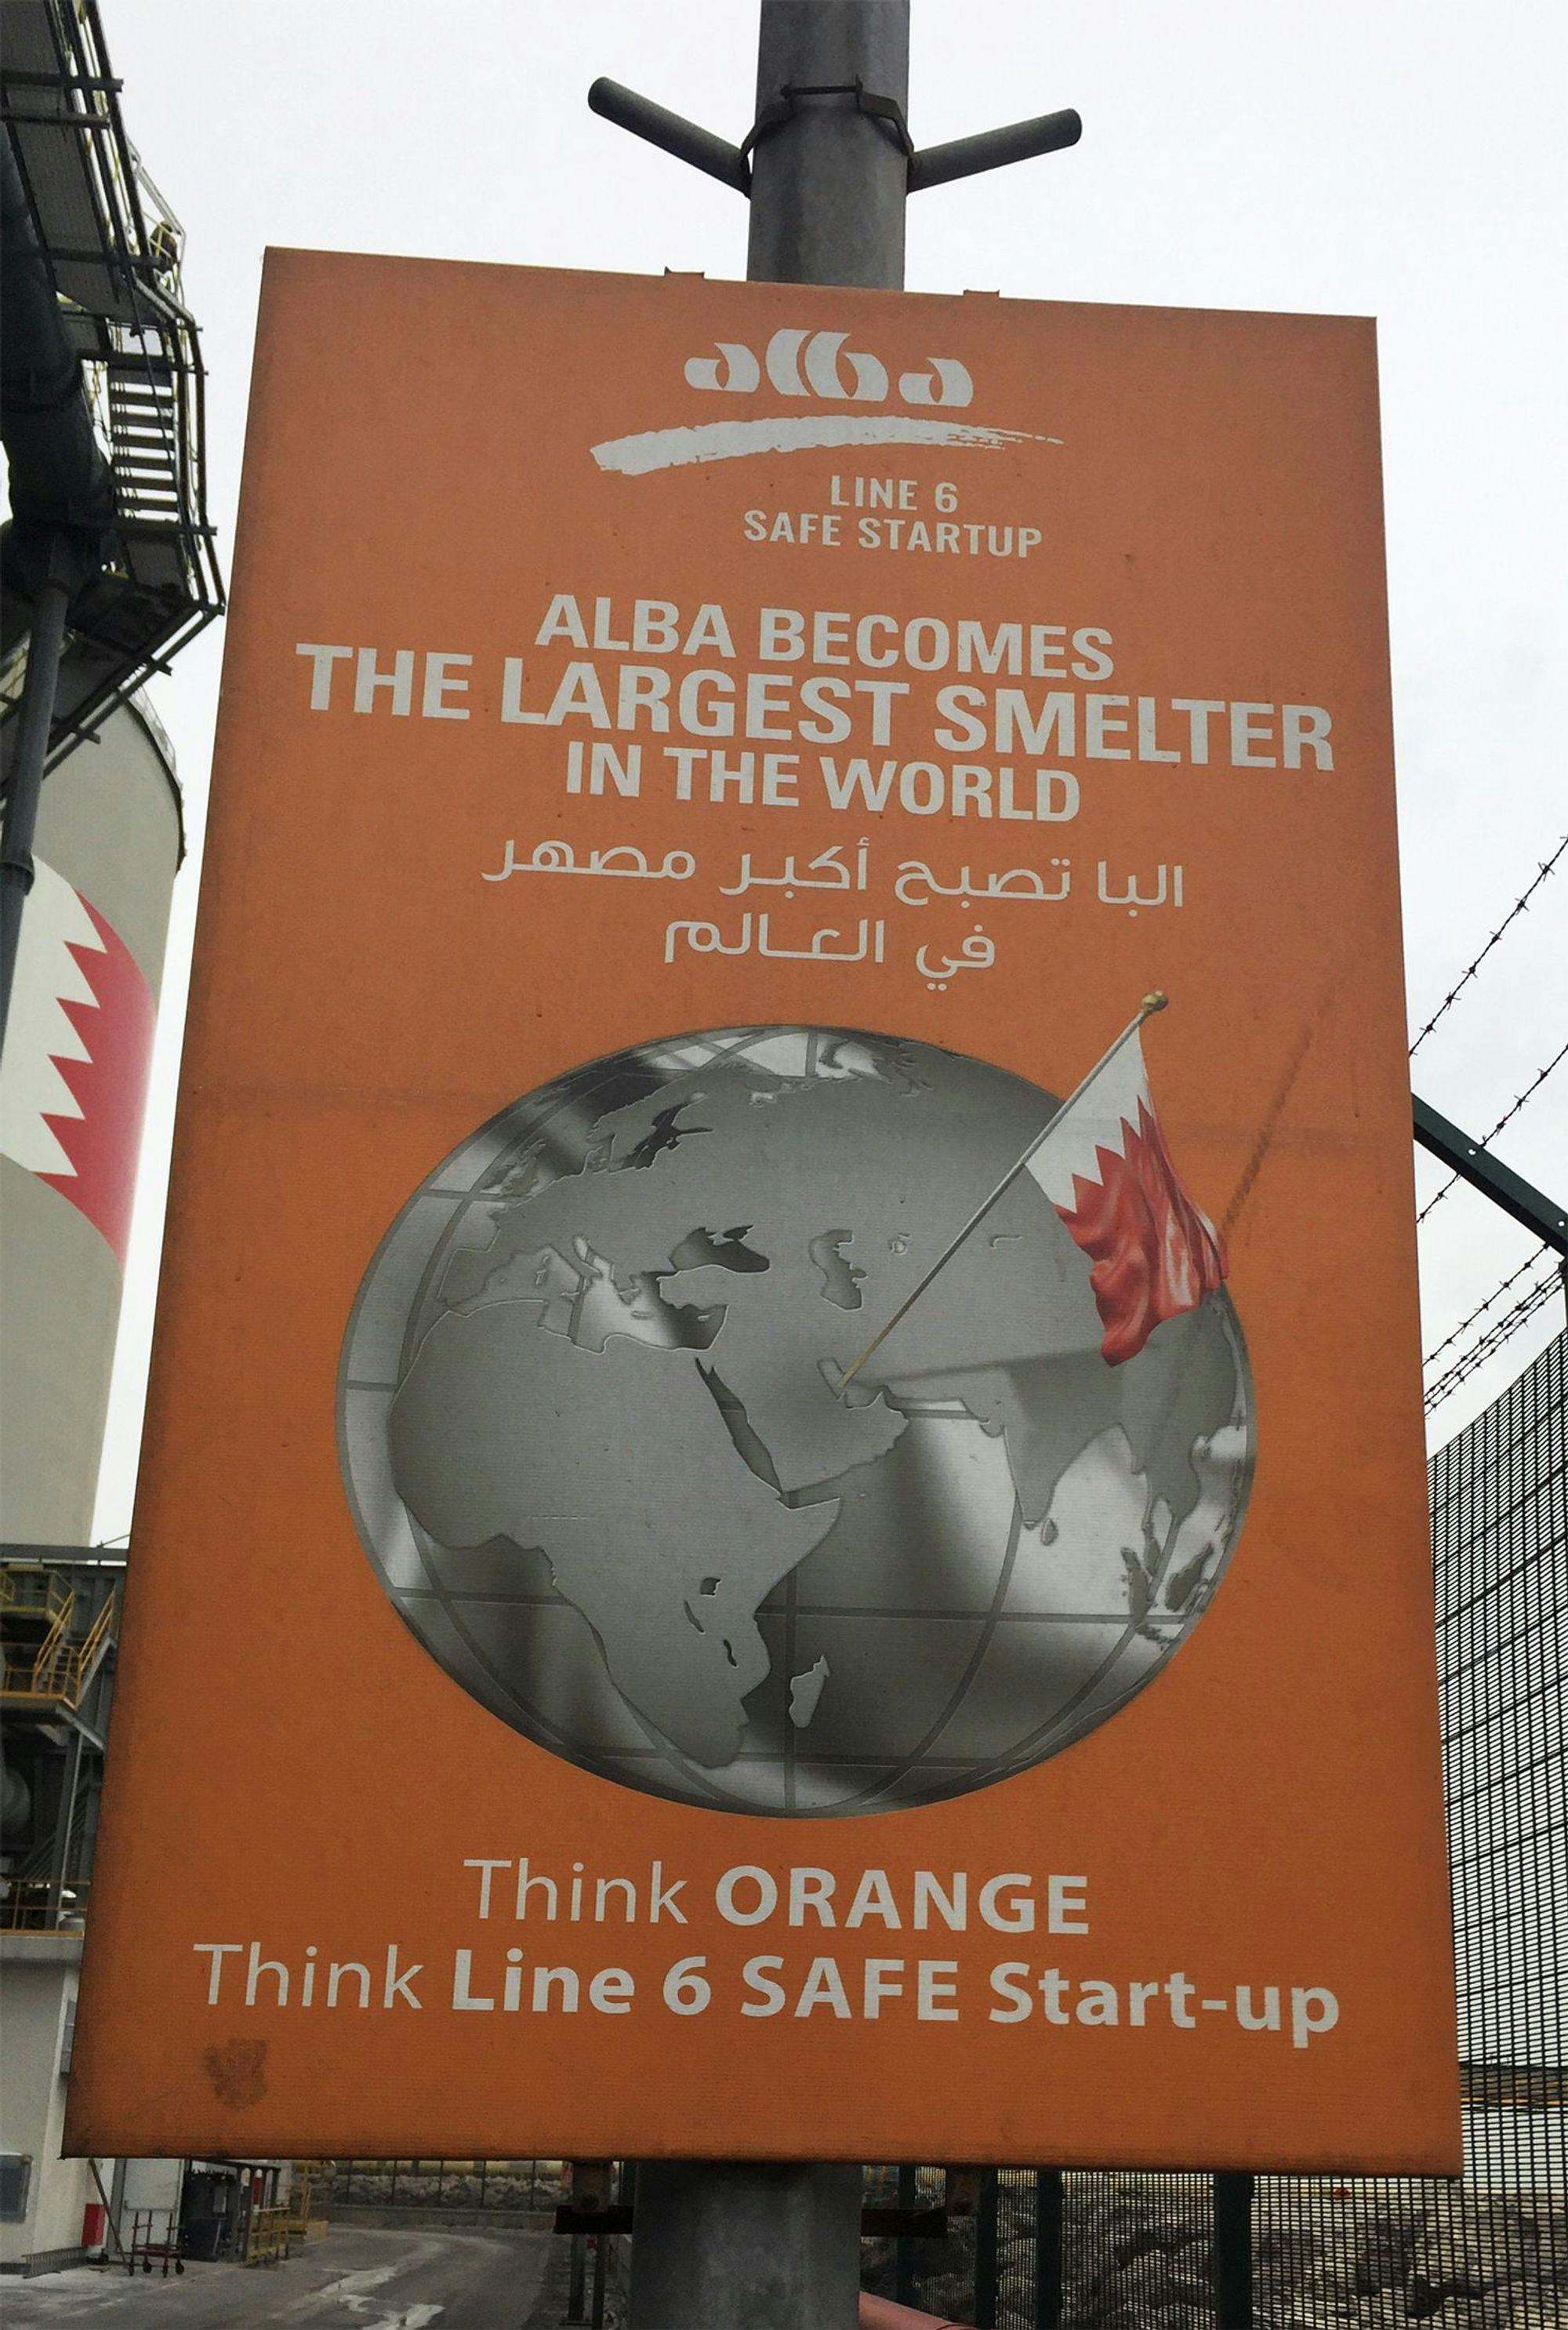 A promotional banner with English and Arabic text